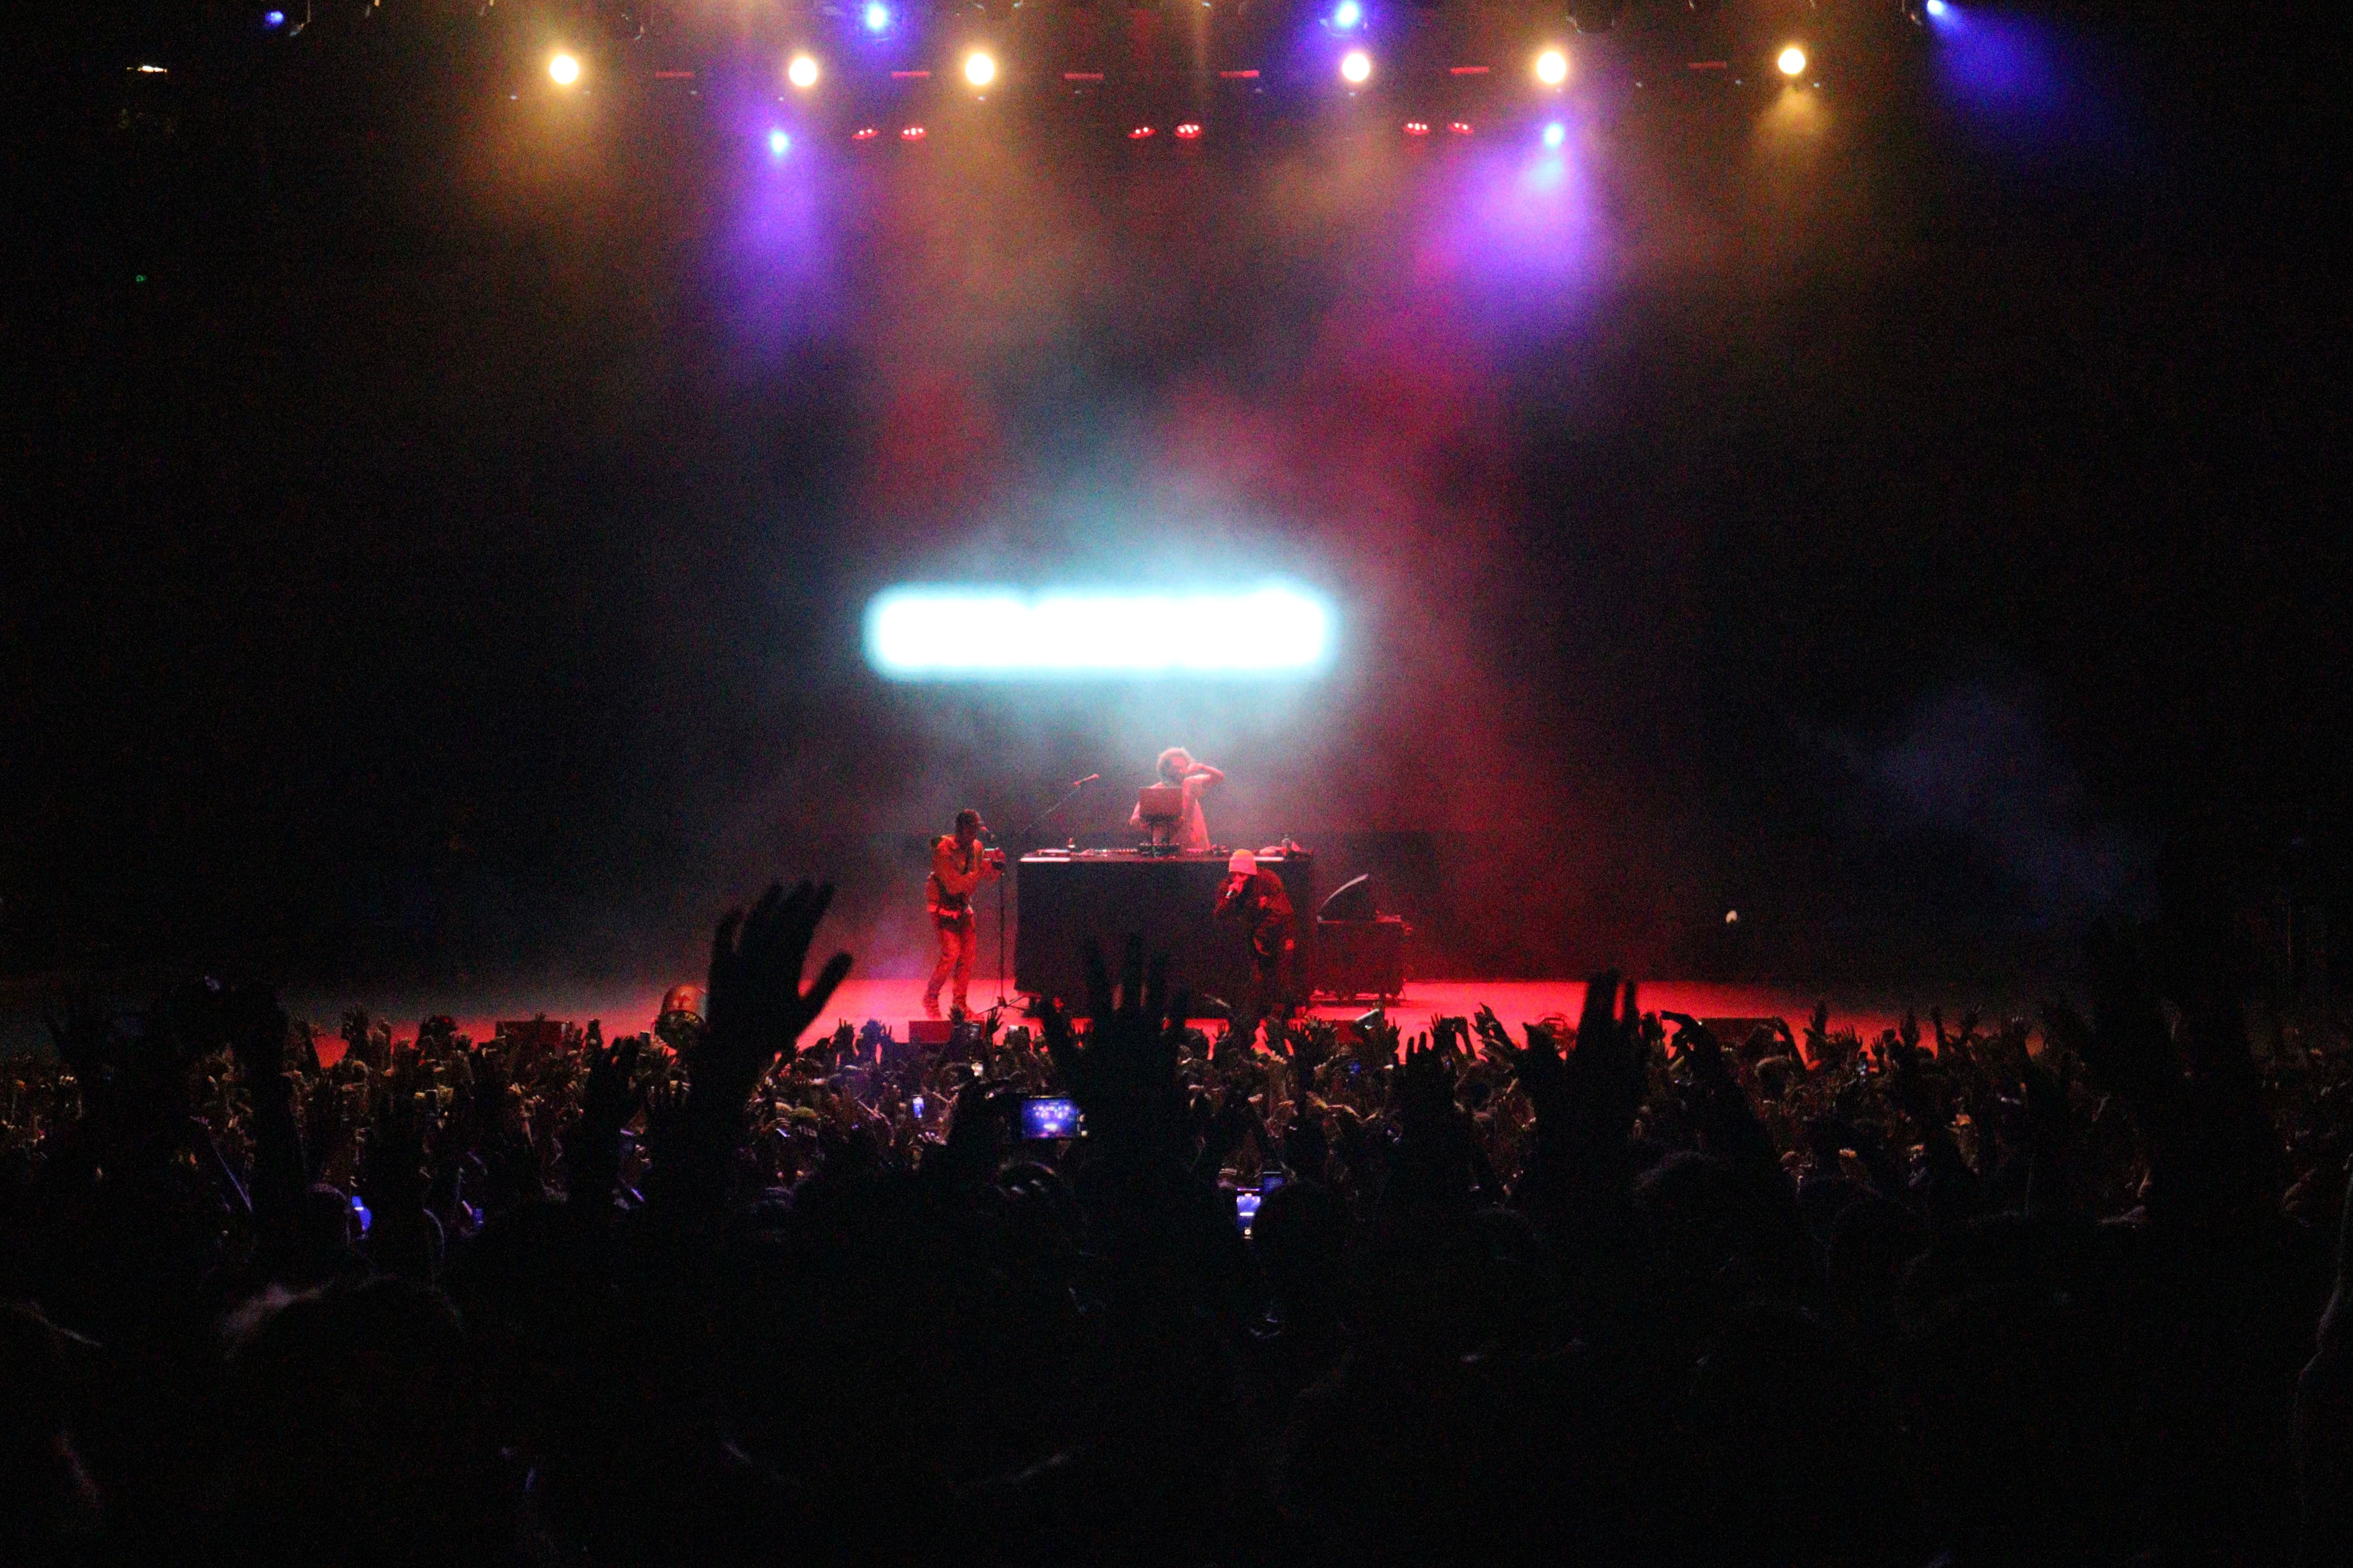 wide picture of three people performing on a stage, dark crowd on bottom half of image, orange and purple lights on the stage